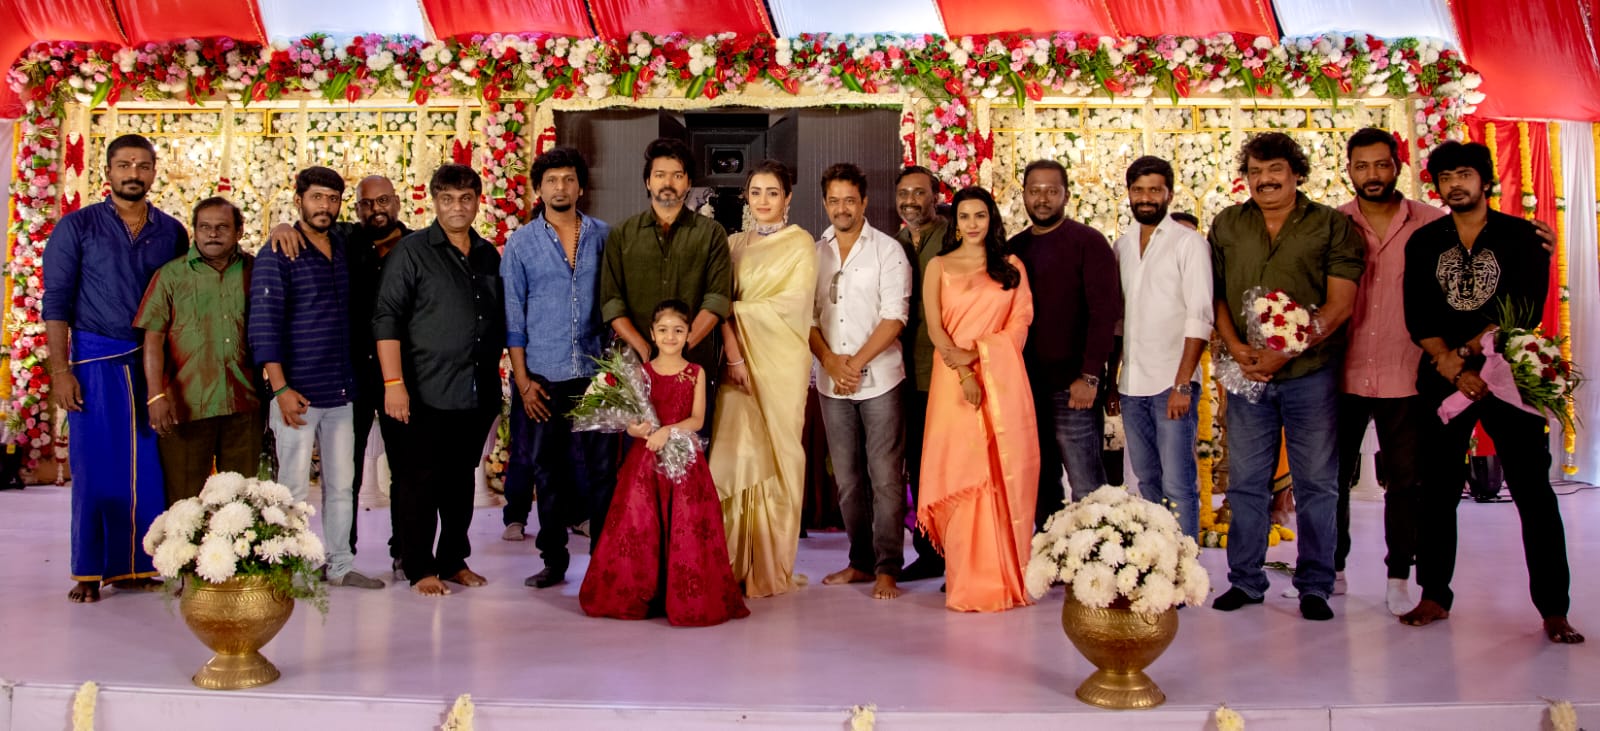 Dalpati, 67, completed his Muhurat in Chennai in a grand manner Launch of the film in the presence of most of the star cast of the film